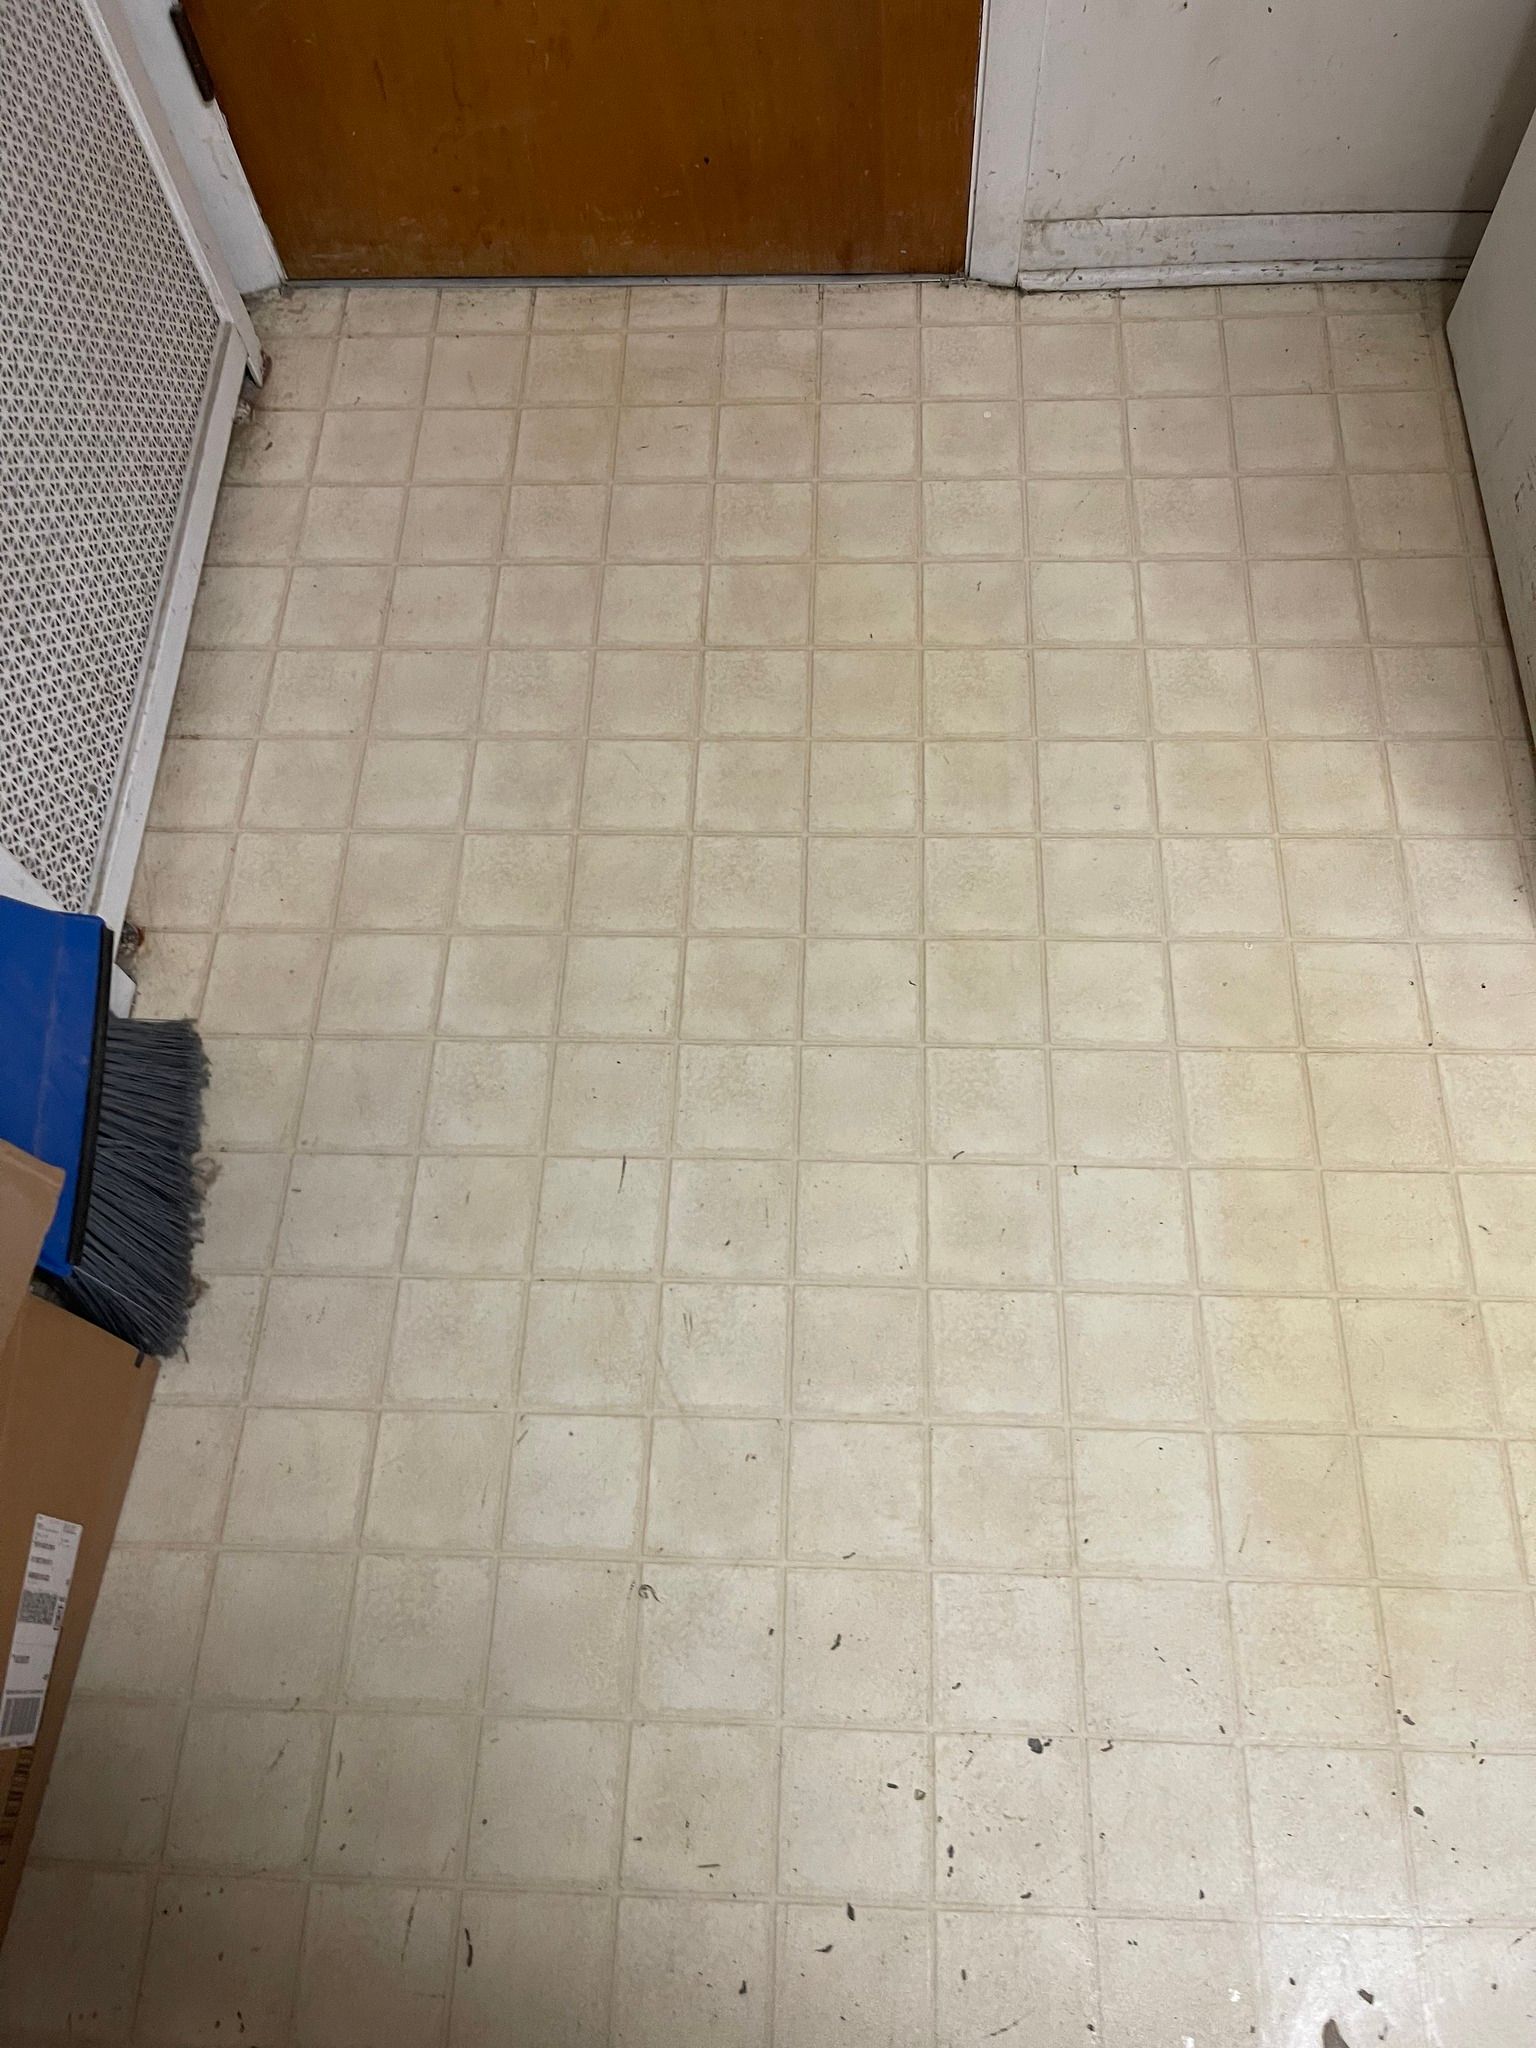 After is a white pristine tile floor and no marks of stain